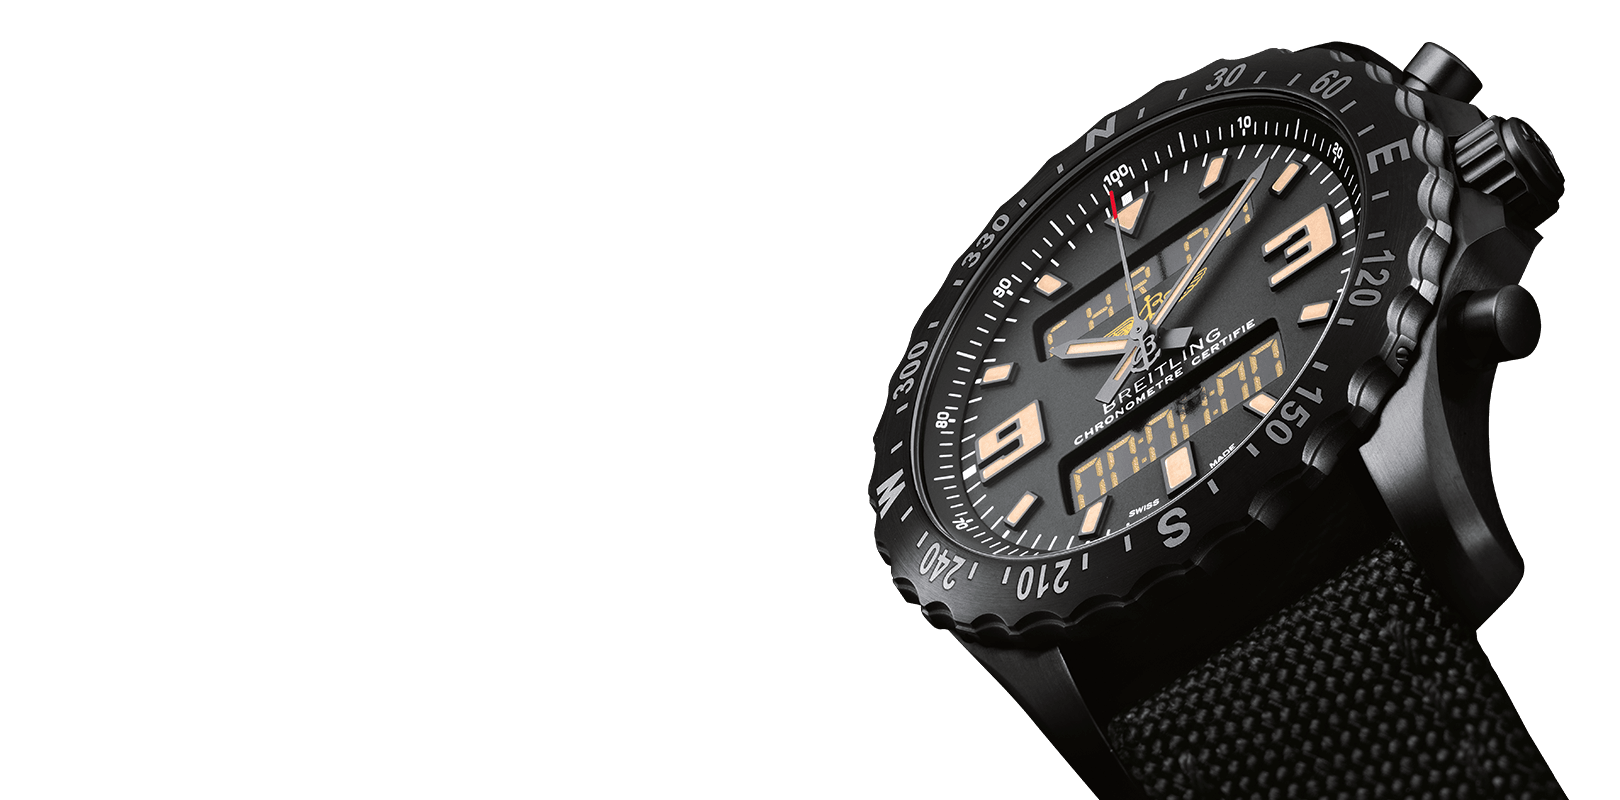 Breitling Cross Ocean Timer II 1461 Permanent CAL Moon Phase DLC Special Editionbreitling cross-ocean chlamyde moon phase 1461 stainless steel automatic